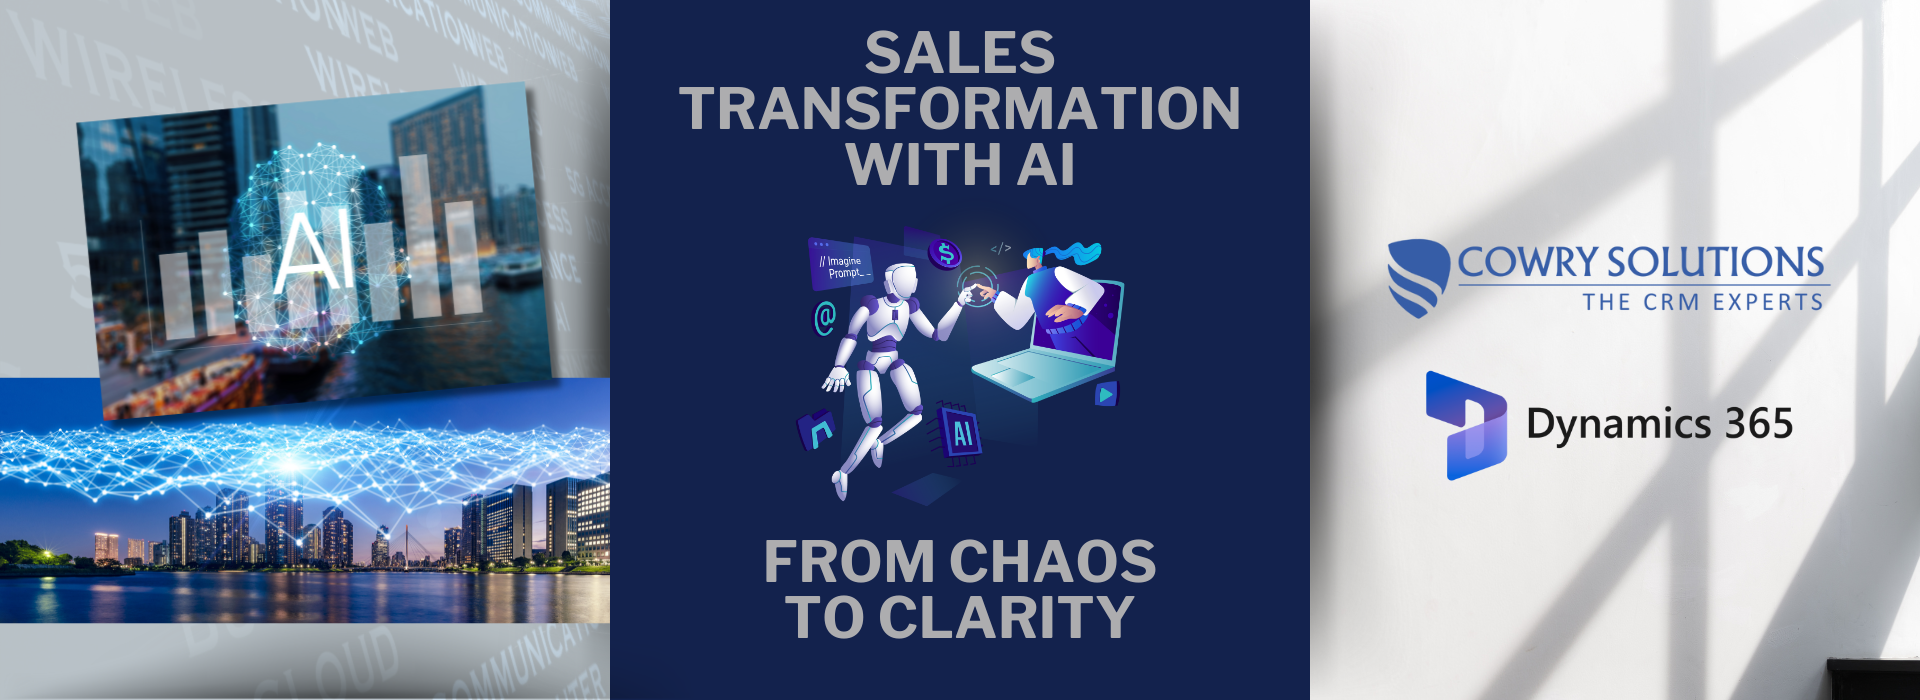 Featured image for “Sales Transformation with AI: From Chaos to Clarity”